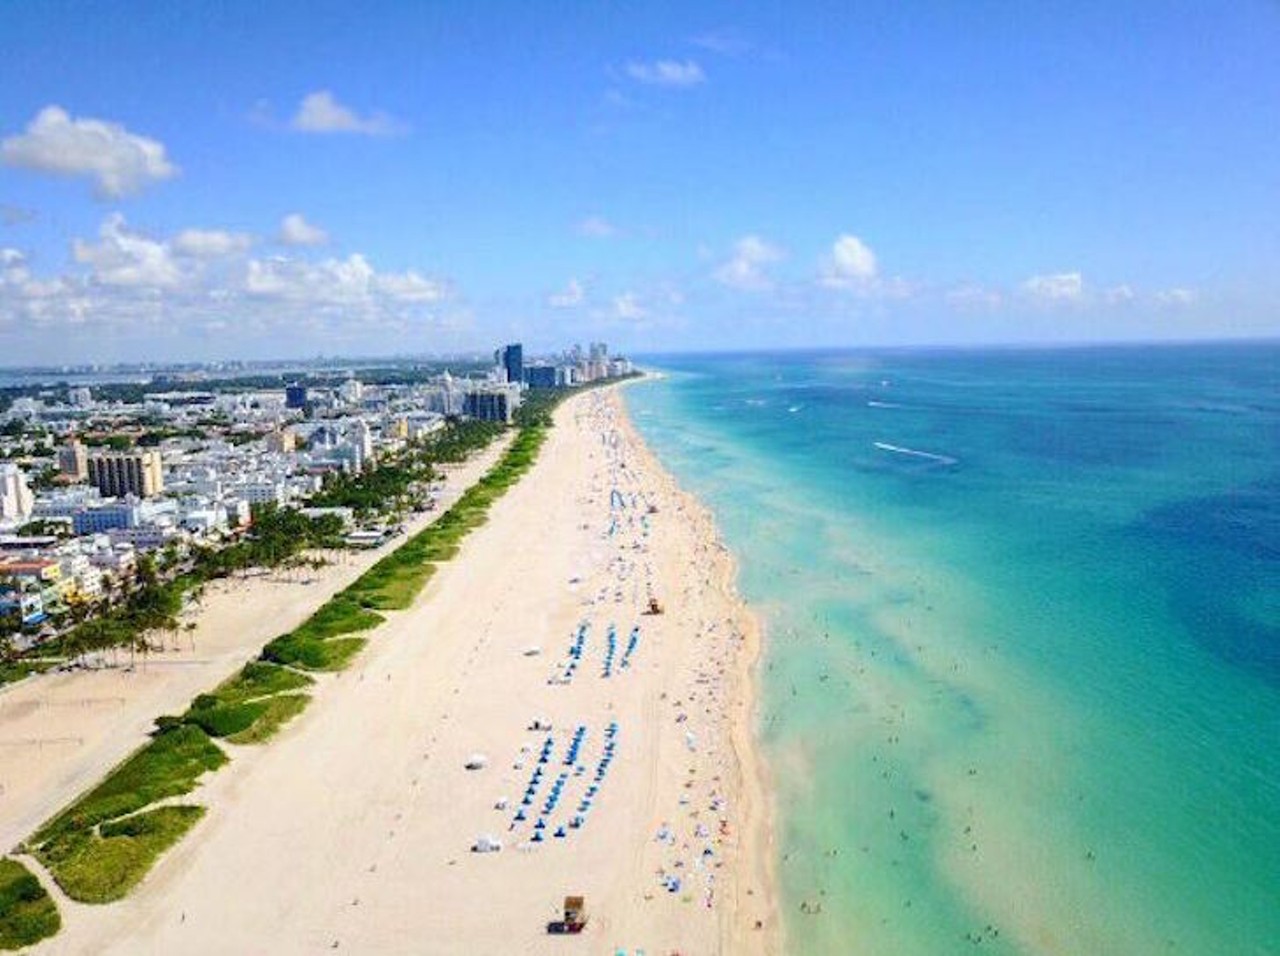 South Beach
Driving distance from Orlando: 4 hours 
South Beach is known the world over as a premier cultural and nightlife destination. What some may forget is that this vacation mecca in Miami also sports fine white sands and rolling blue waves that rival the world's best beaches.
Photo via ericrassam/Instagram